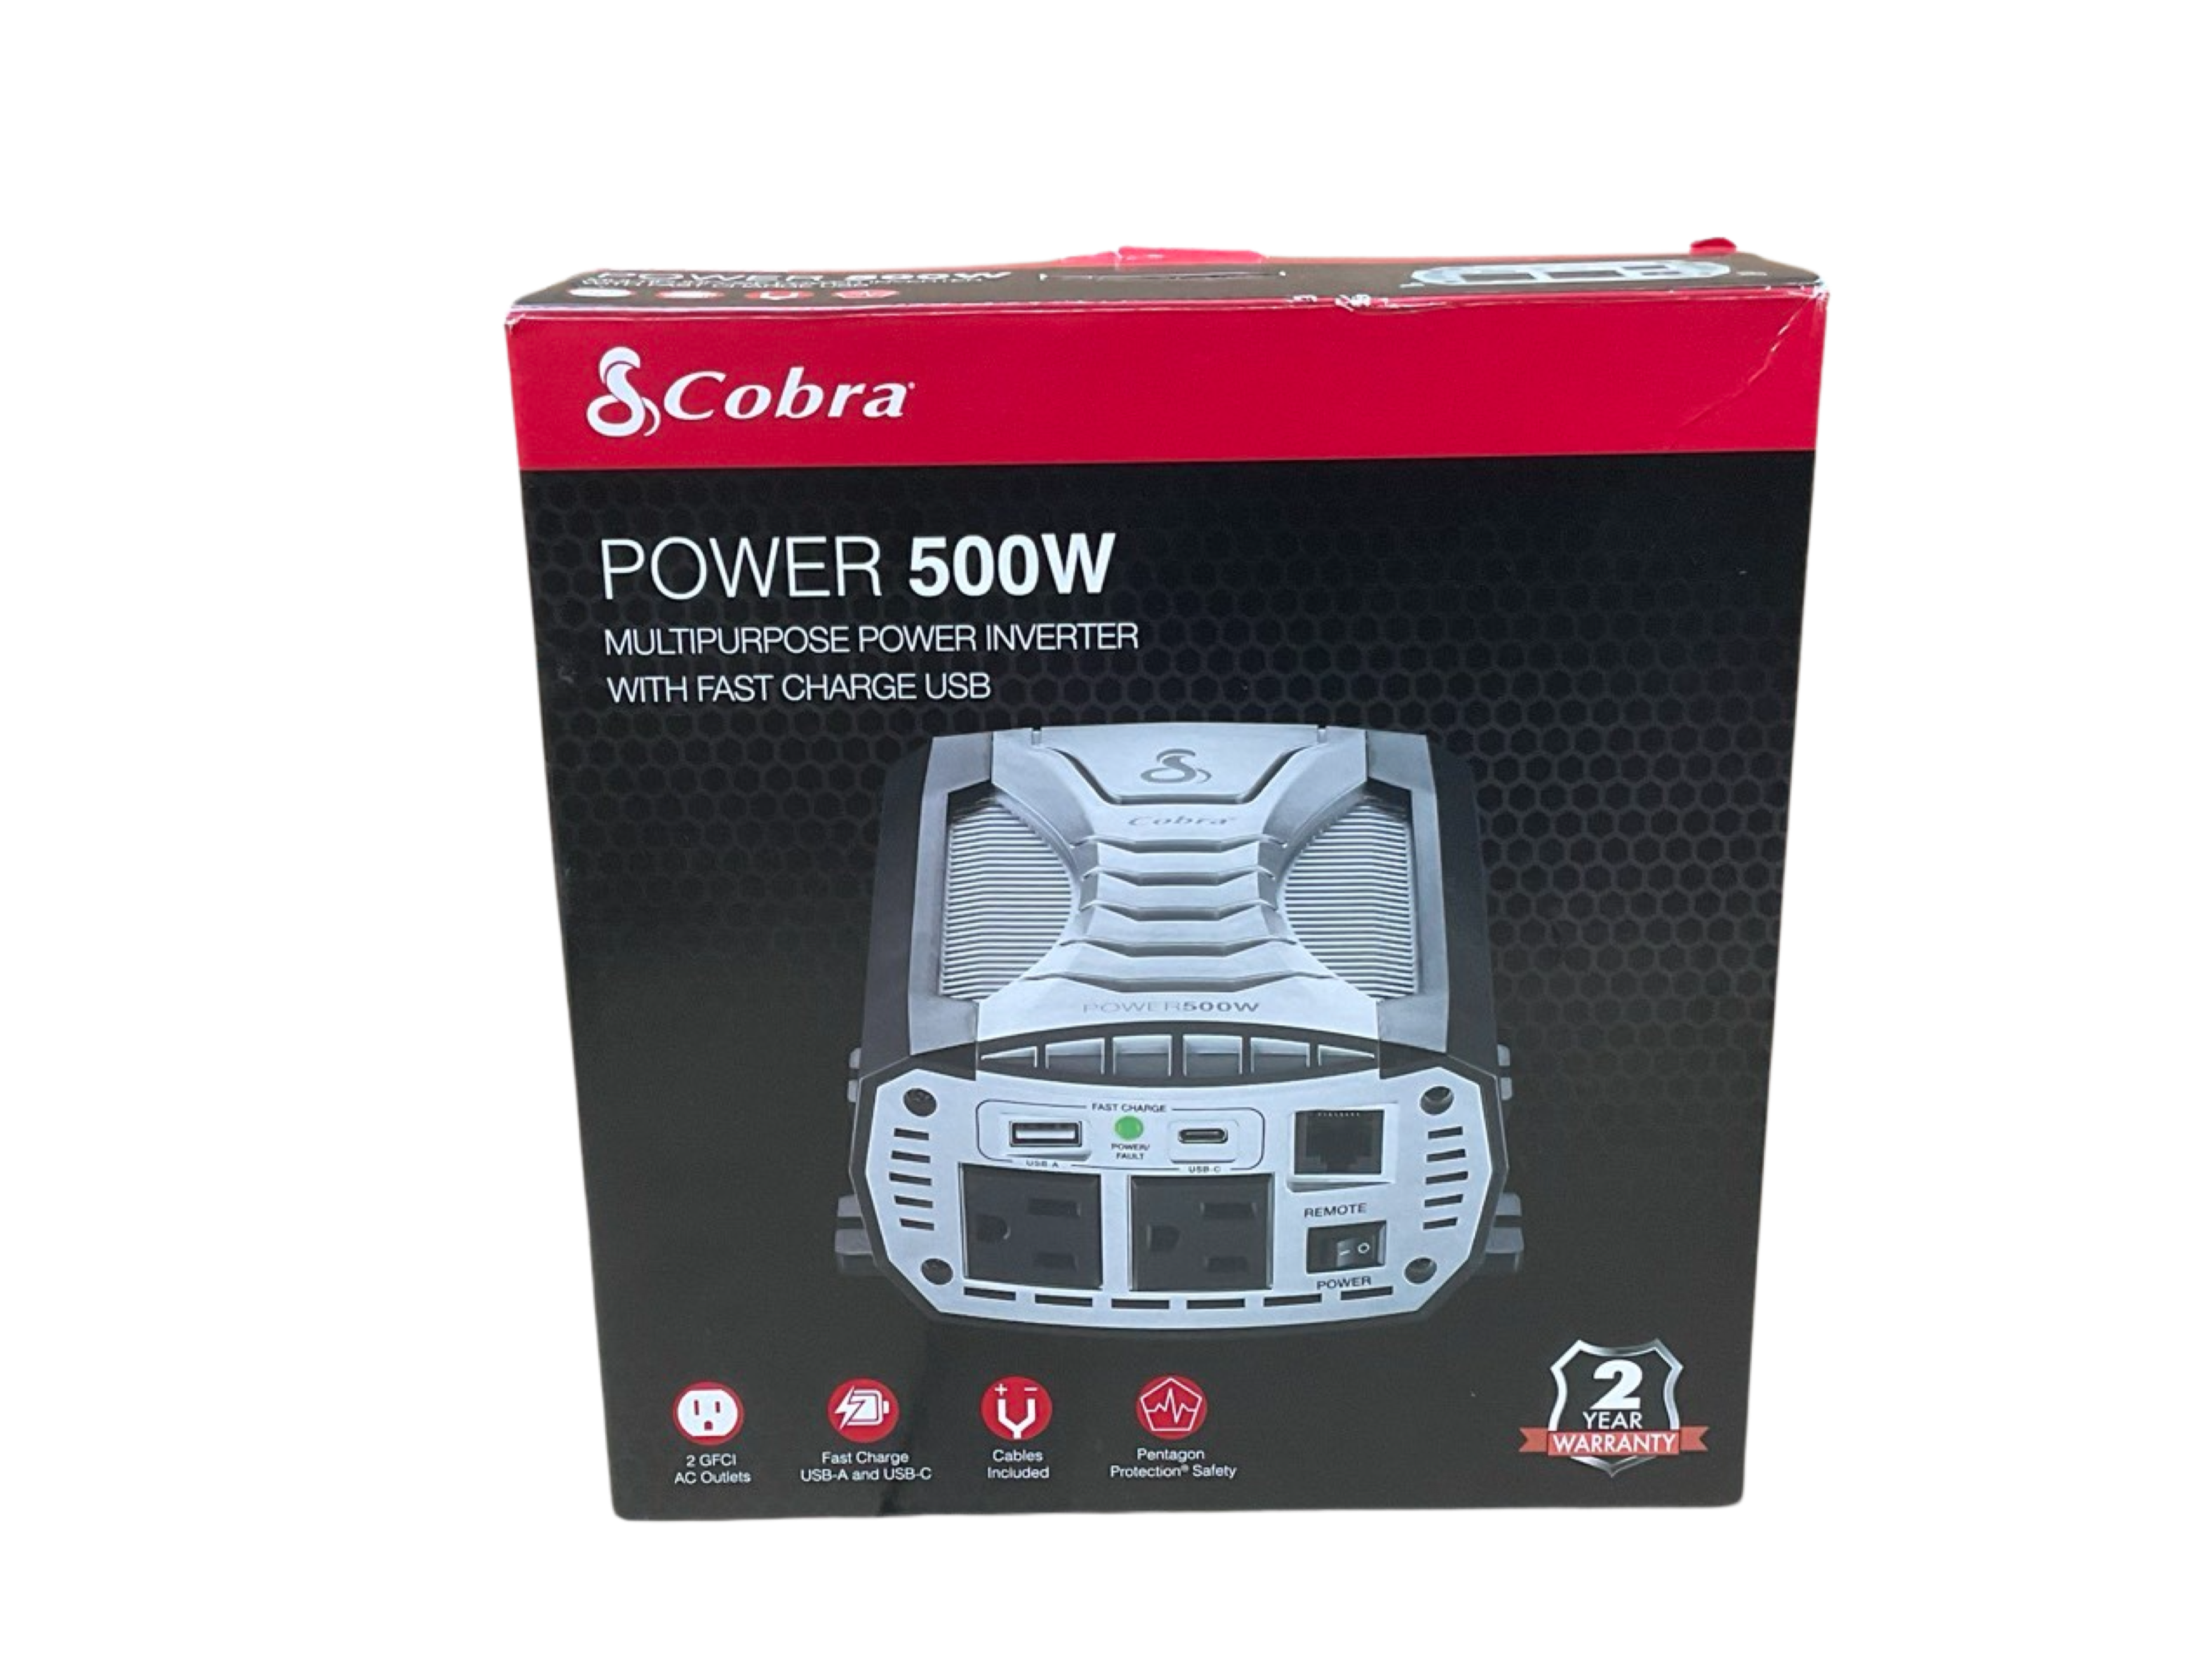 Cobra Power 500W Multipurpose Power Inverter With Fast Charge USB P/N: CPI500W